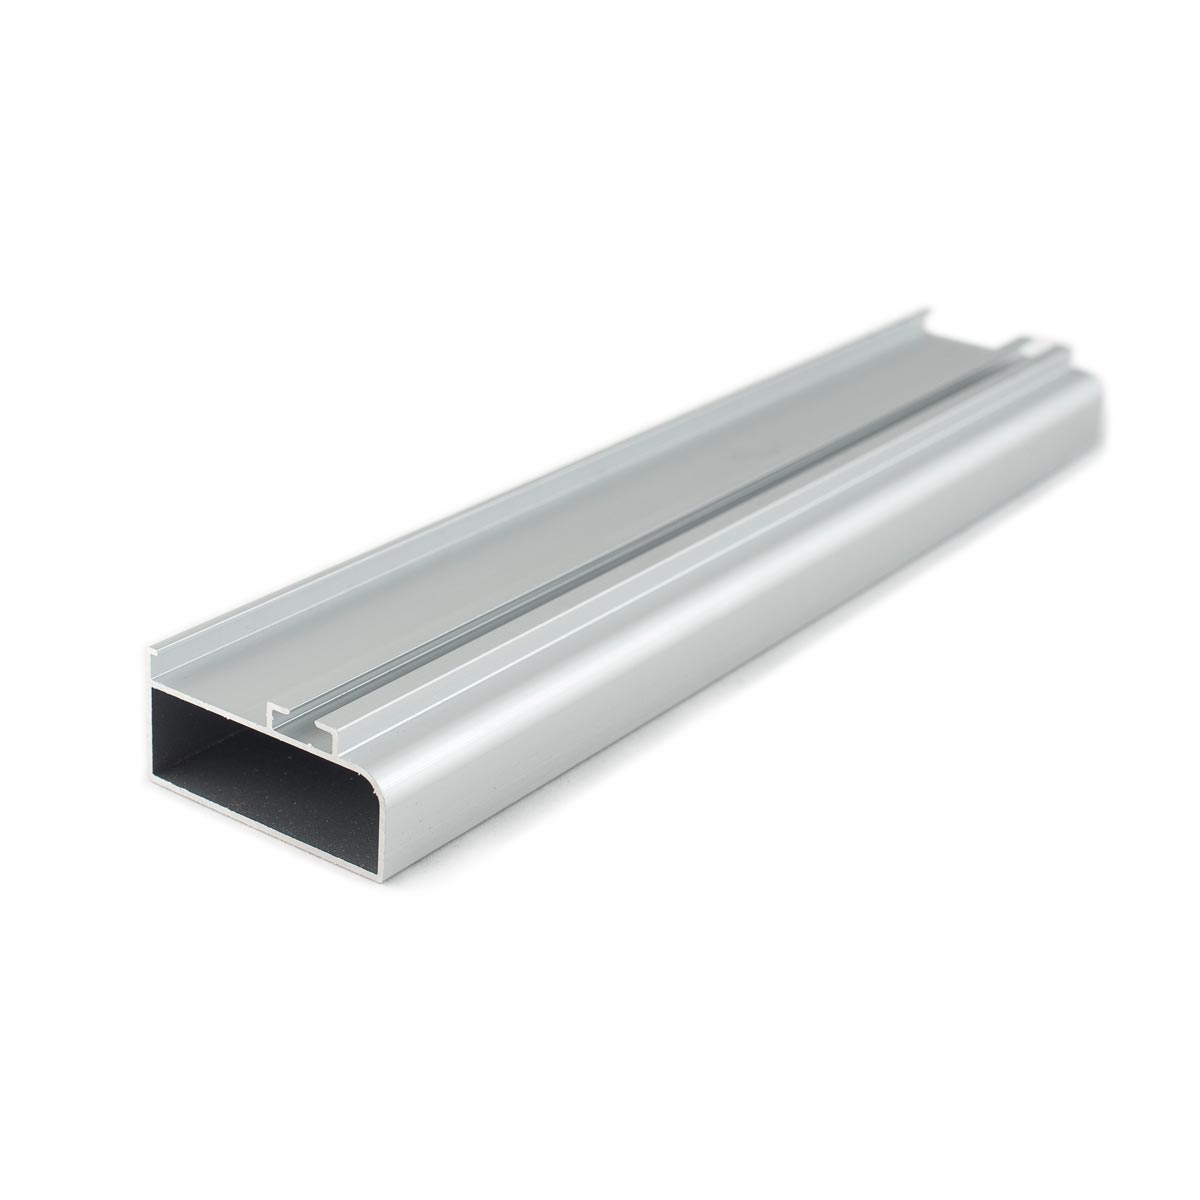 Flat Gola Profile Silver For Drawers